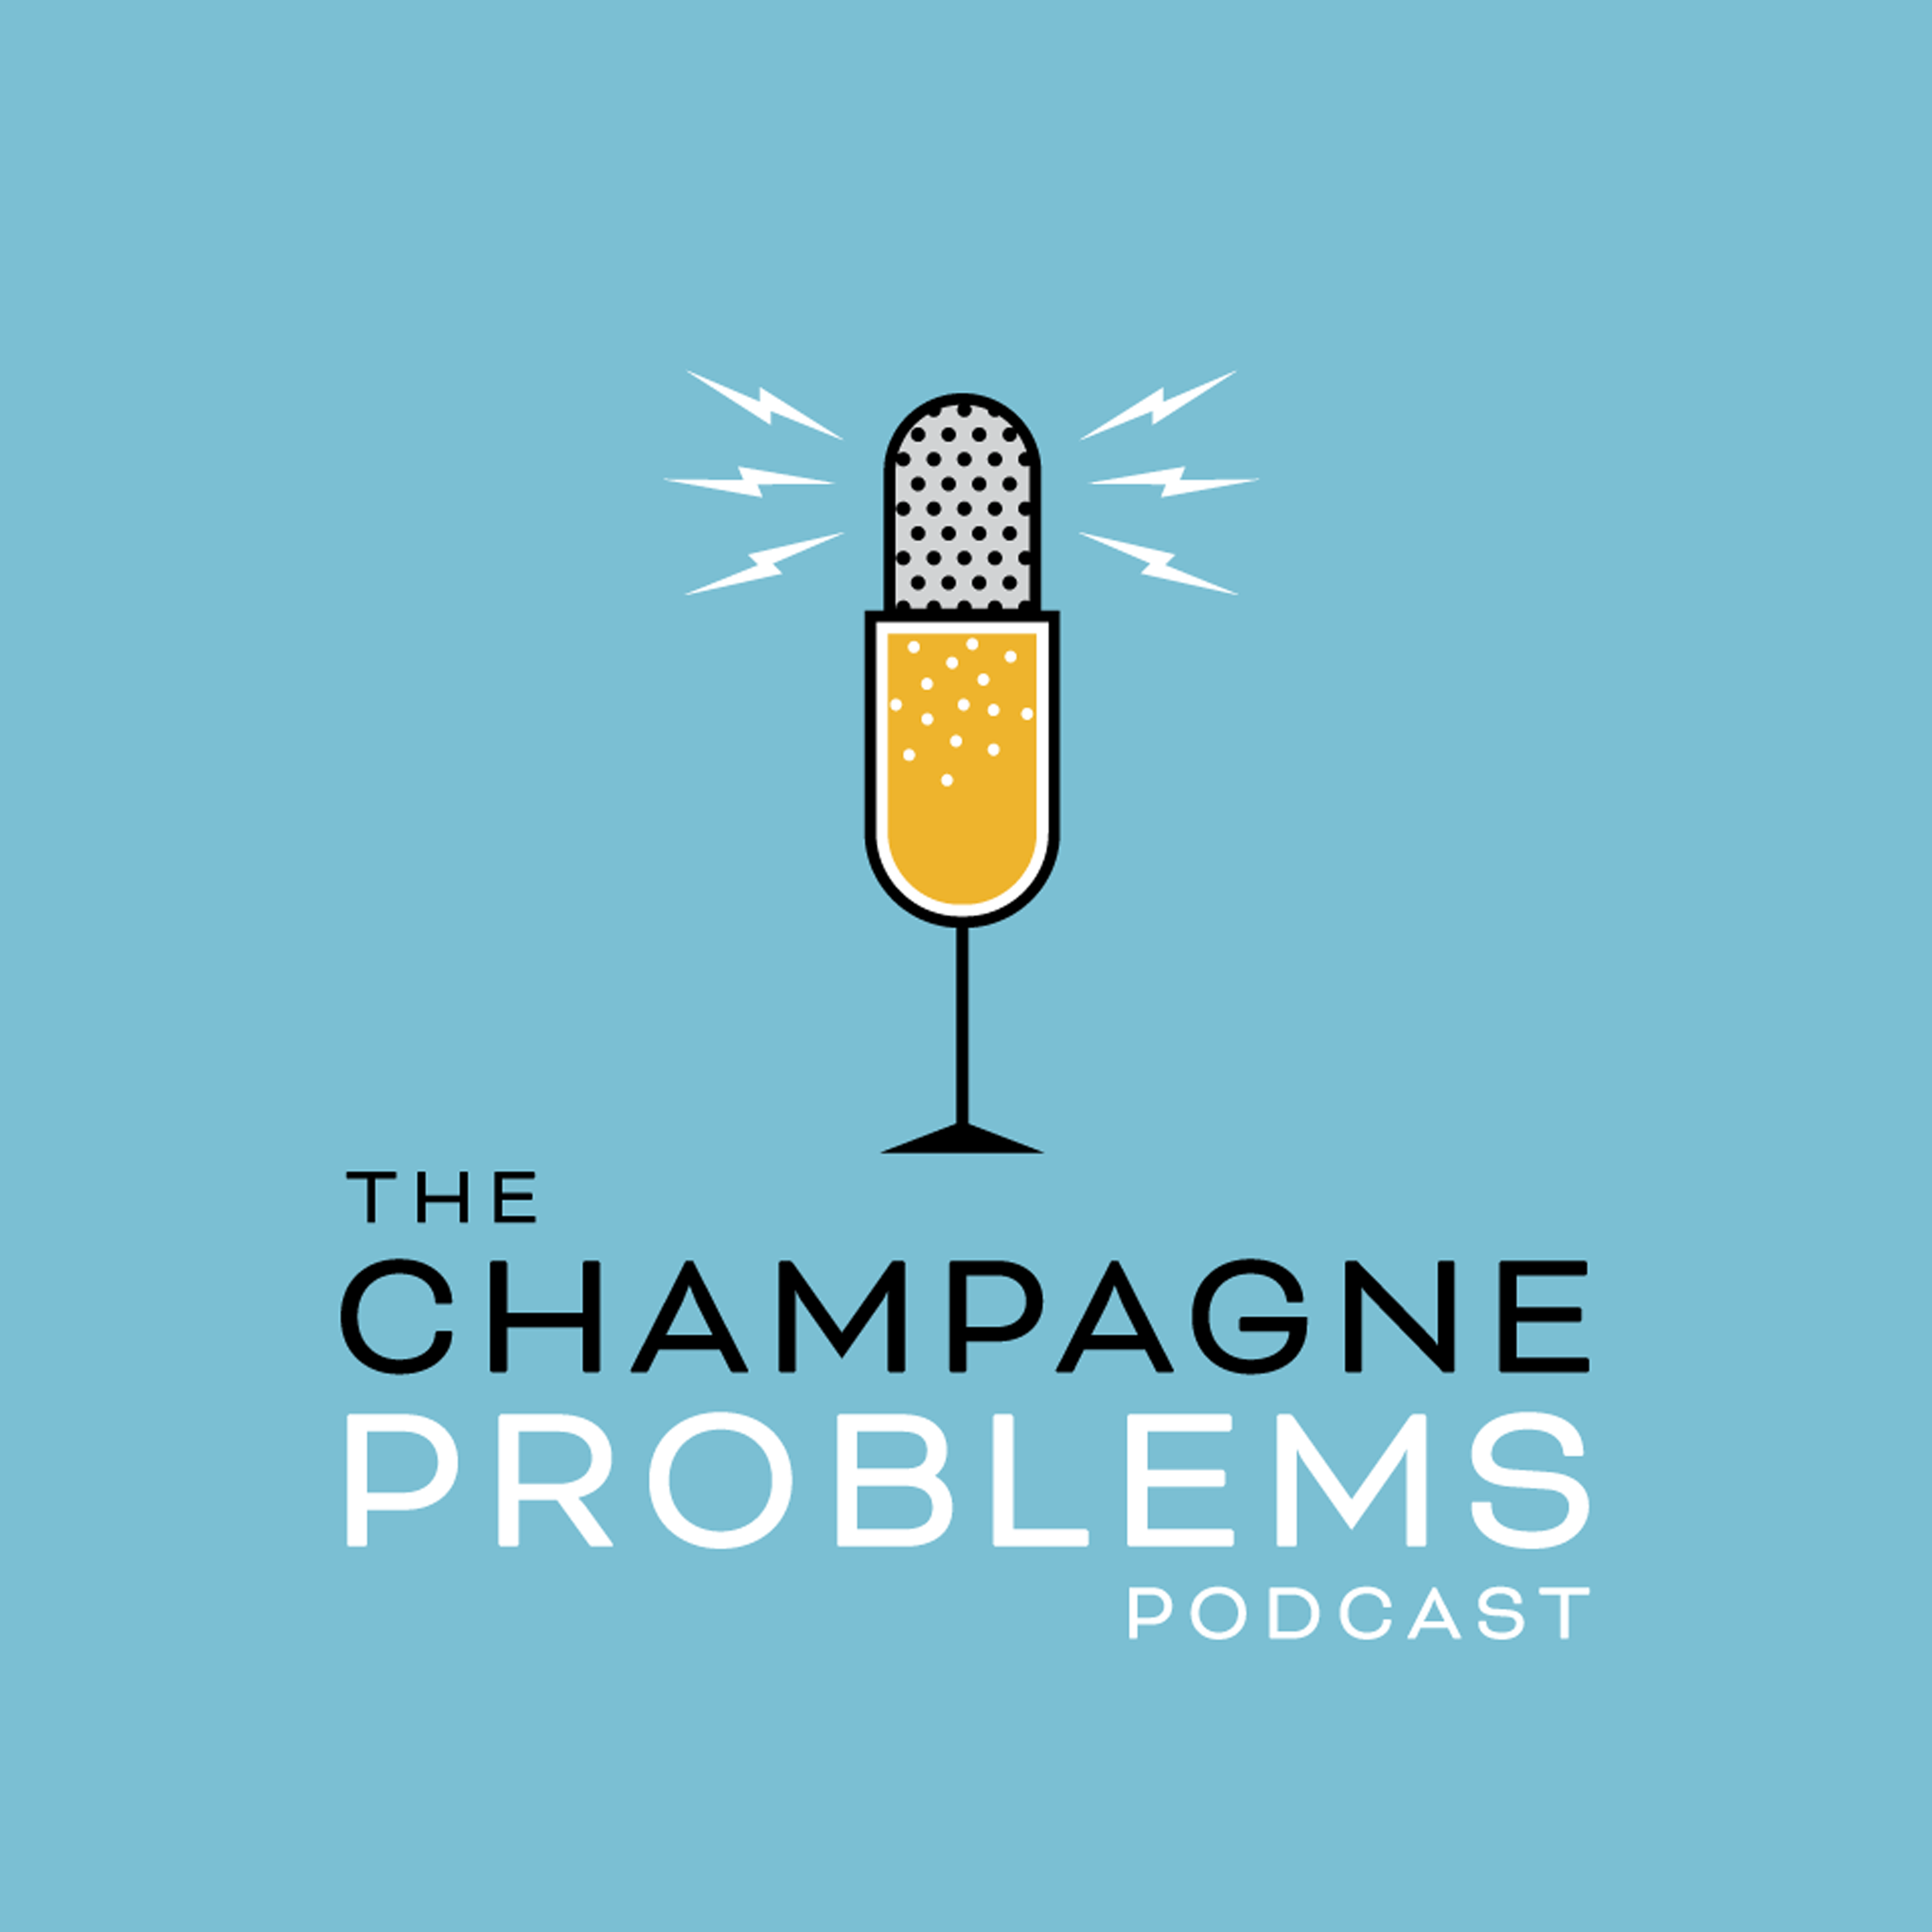 Champagne-Problems-Square-Full-Color-RGB-958px@72ppi copy 2